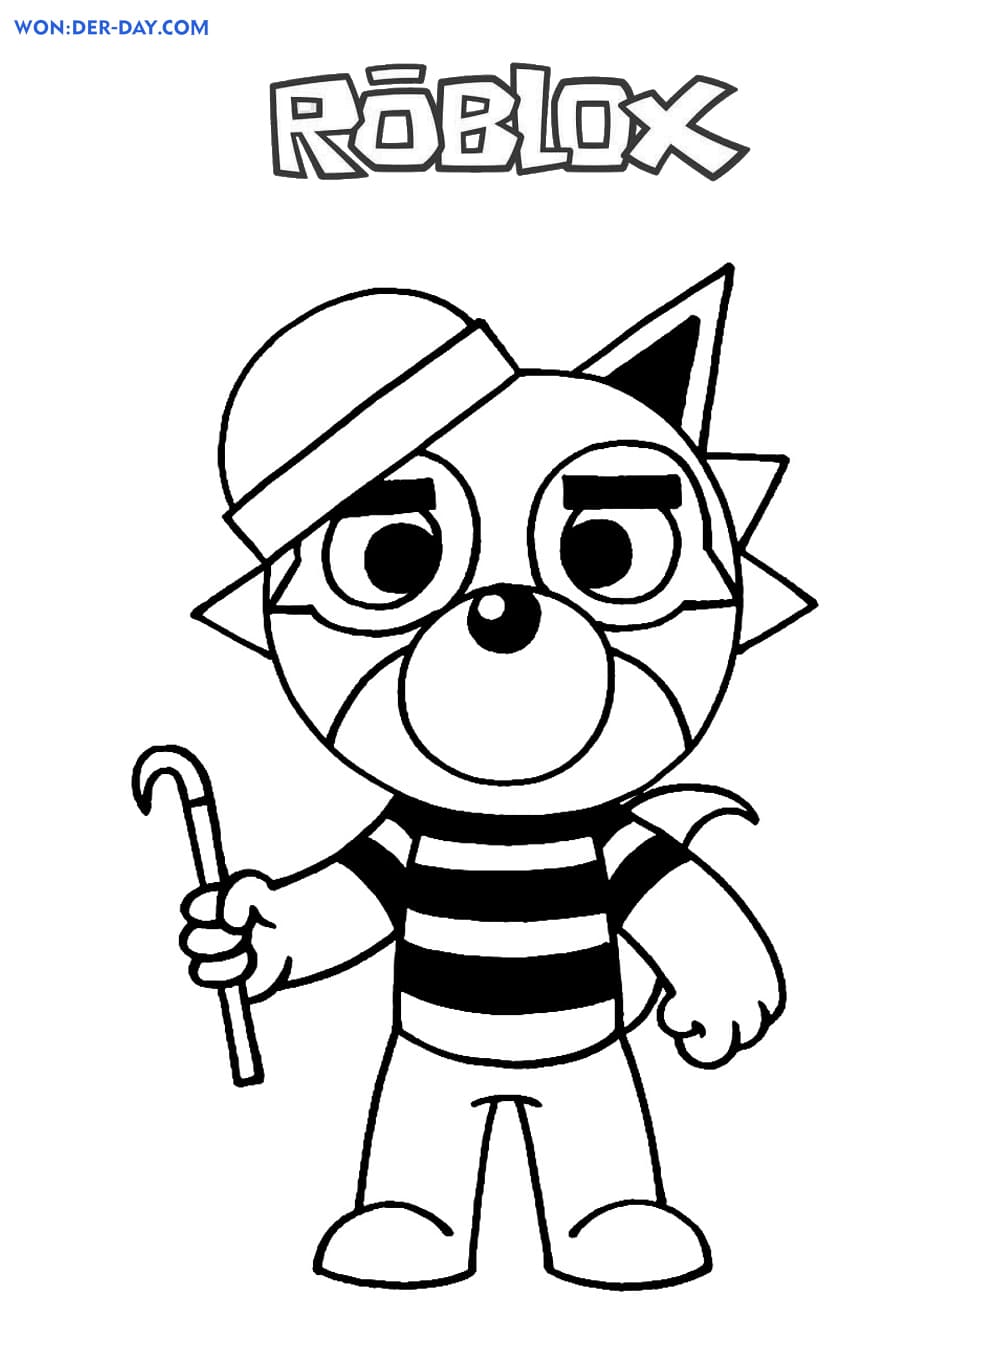 Piggy Roblox Coloring Pages Wonder Day Coloring Pages For Children And Adults - roblox coloring sheets piggy